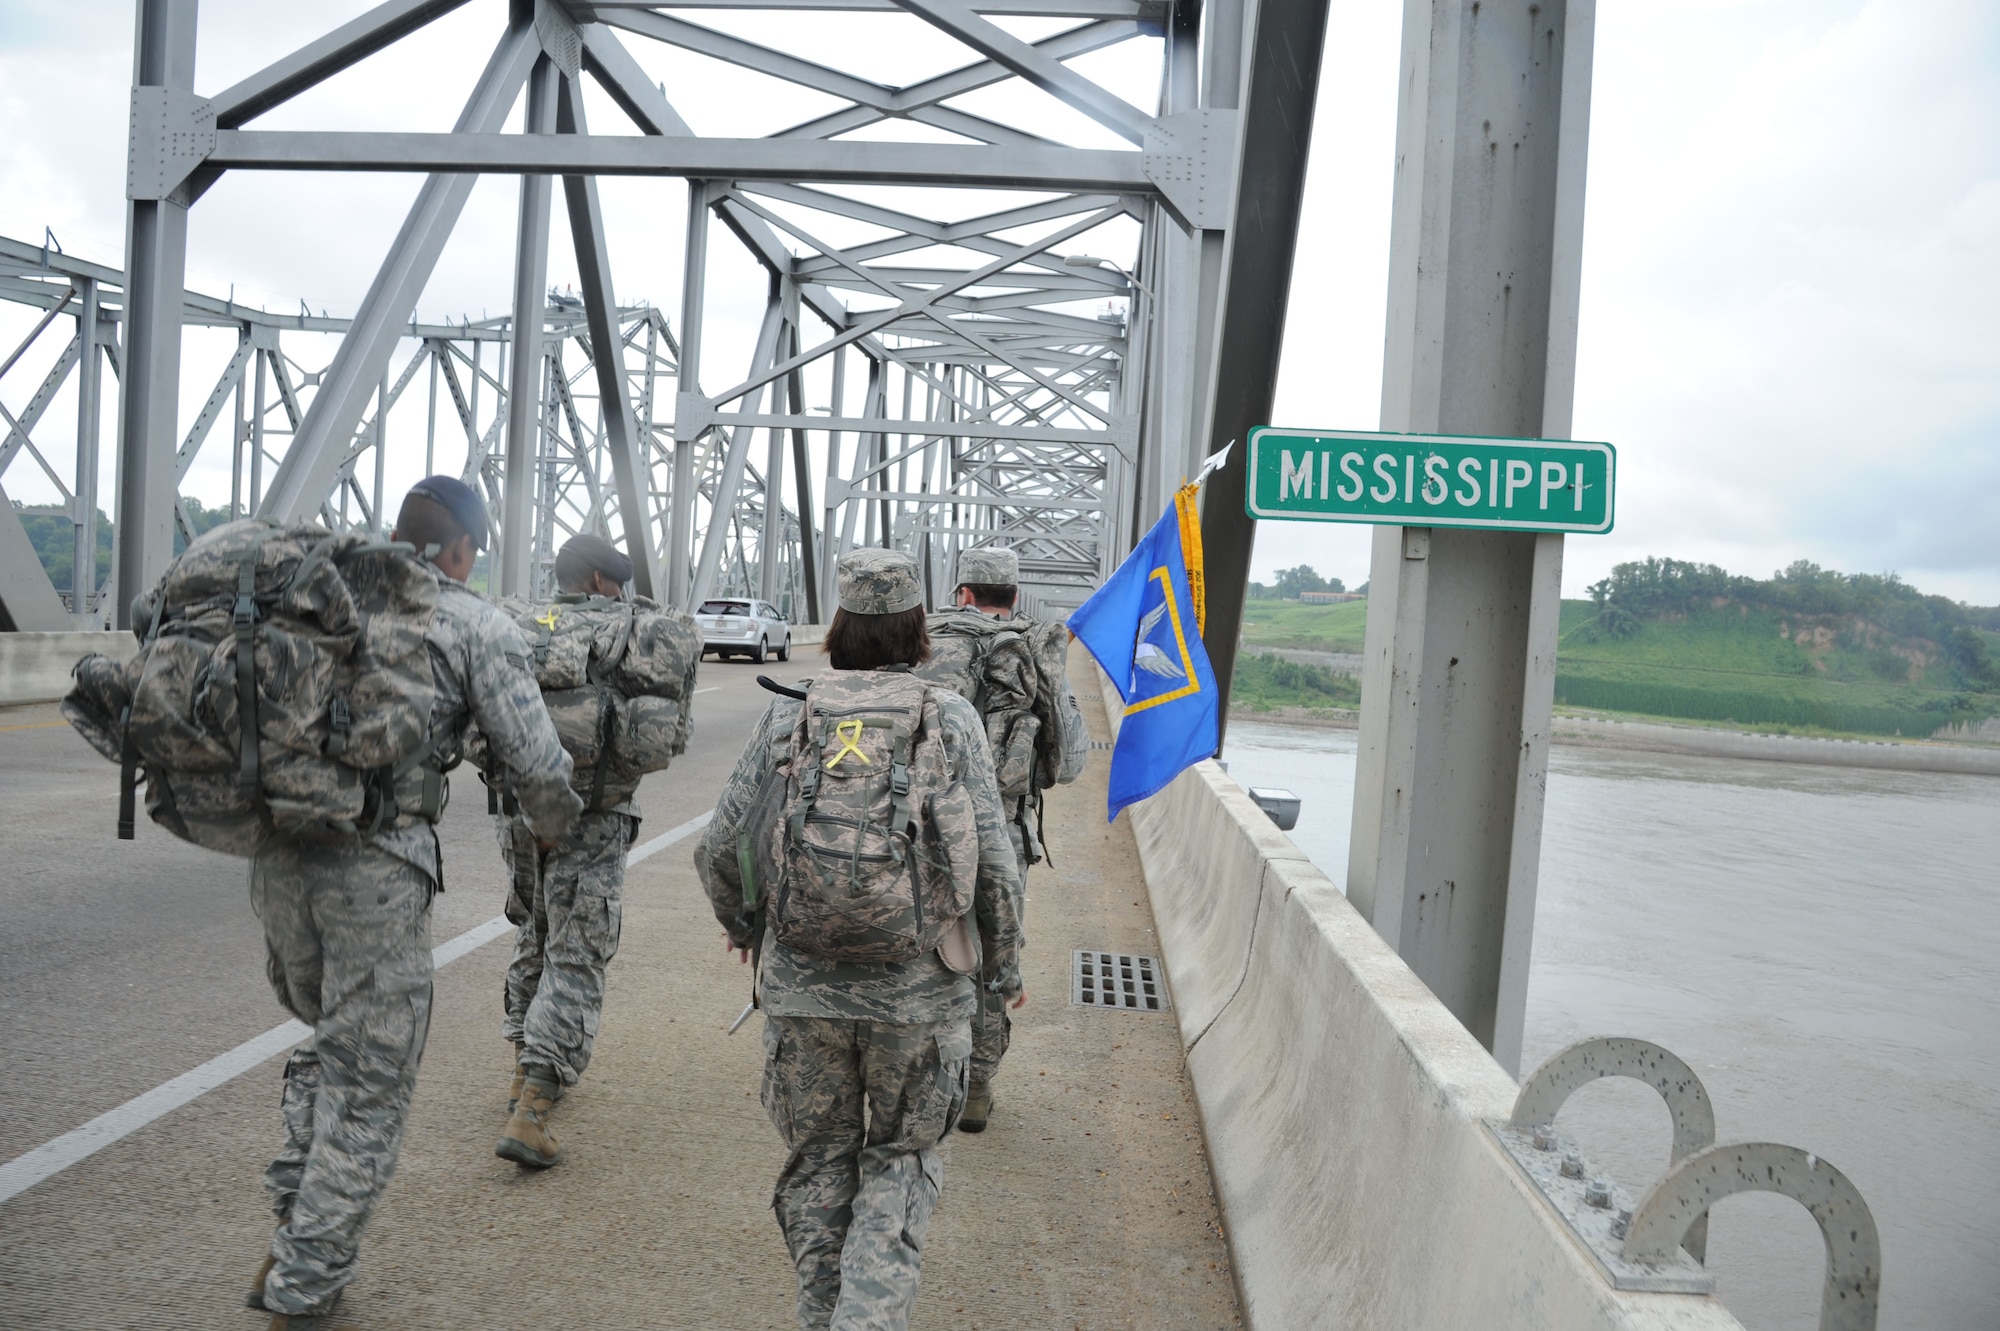 Four members of the 14th Security Forces Squadron from Columbus Air Force Base, Miss., carry the “Ruck March to Remember” guidon over the Mississippi state line on the Vidalia-Natchez Bridge on July 26. Team One marched 87 miles of the 146 mile leg assigned to the 14th SFS. (U.S. Air Force photo/Airman 1st Class Chase Hedrick)